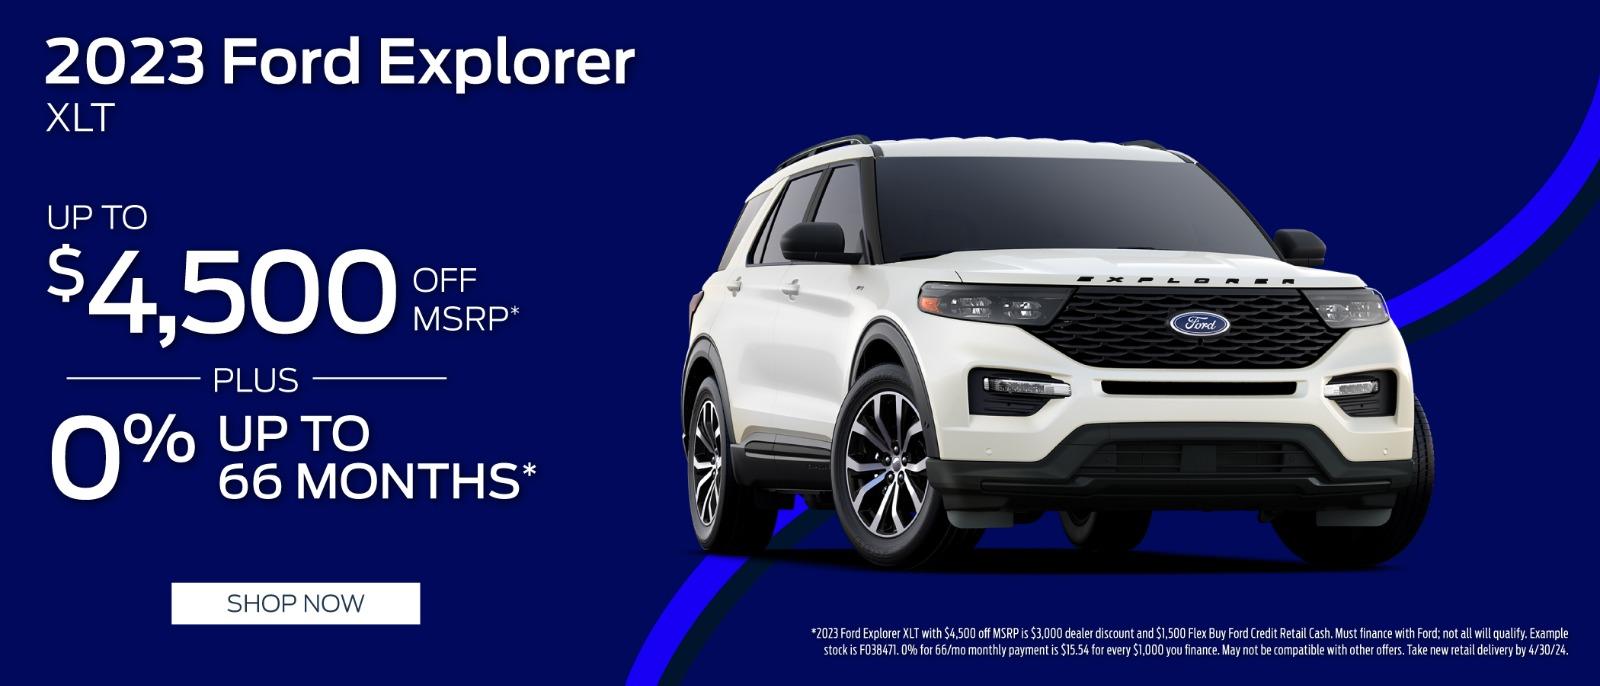 2023 Ford Explorer $4,500 Off MSRP plus up to 0% for 66 months